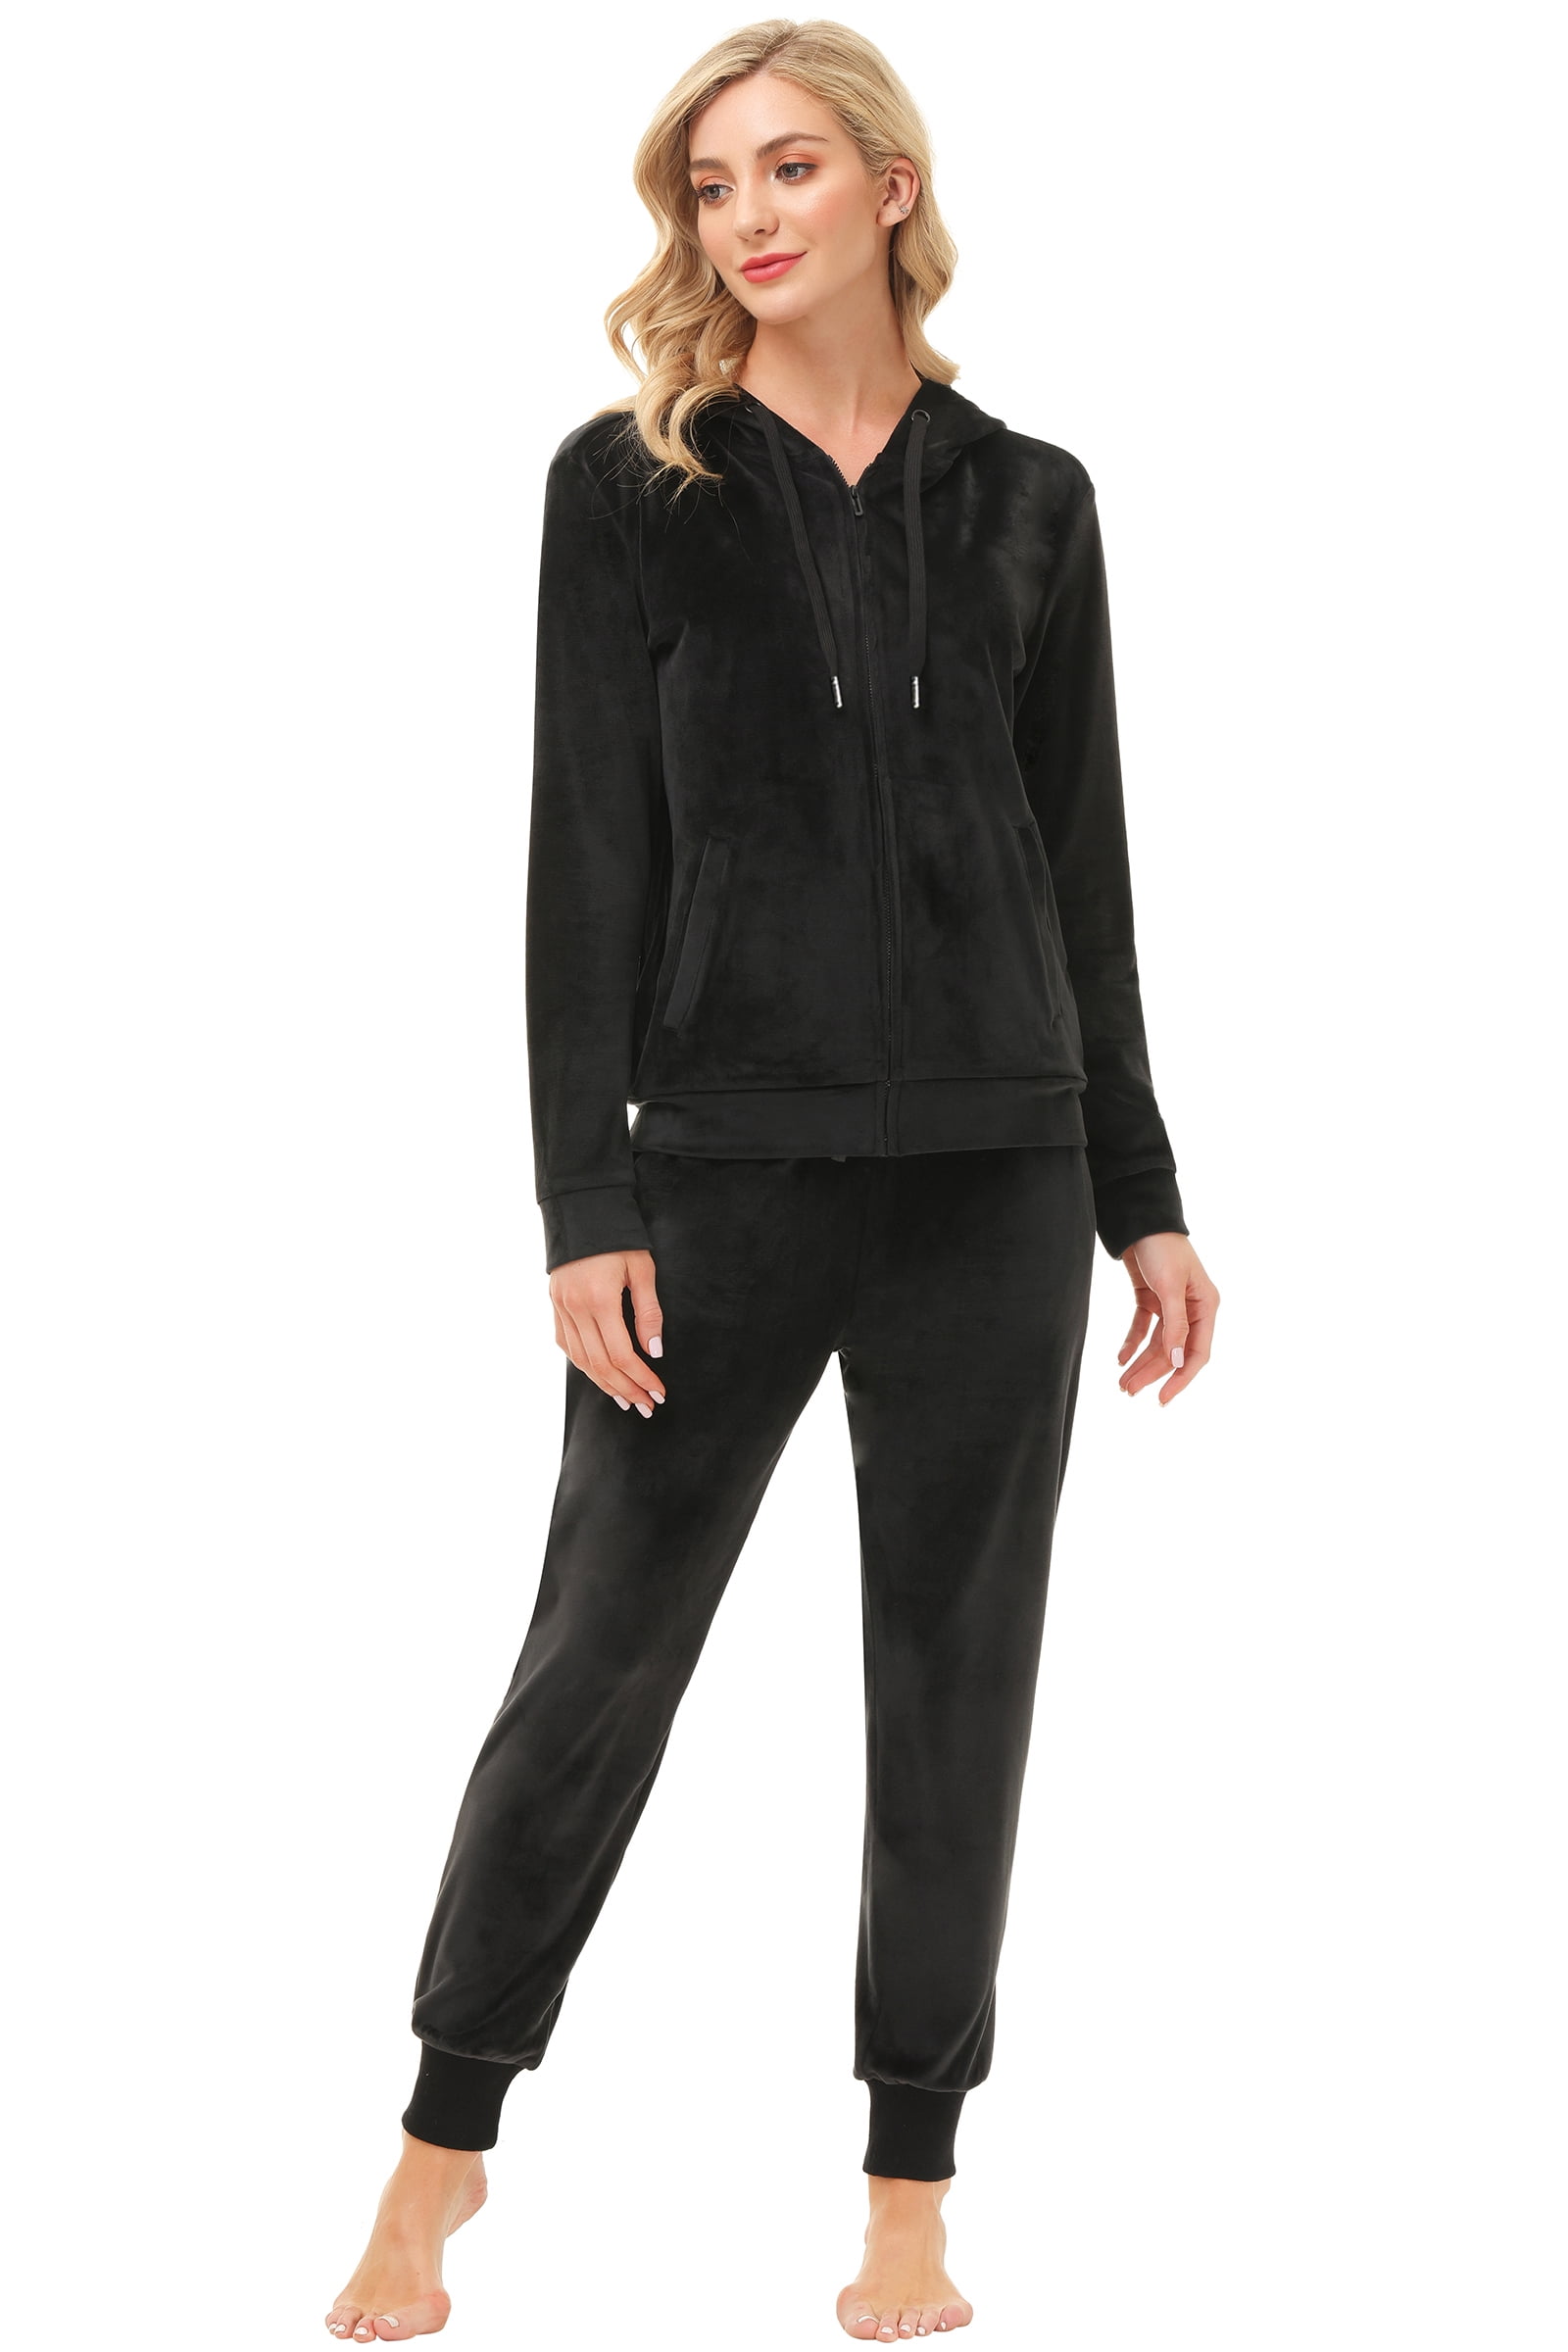 ANOTHER CHOICE Women Velour Tracksuit,Soft Velour Sweatsuit Sets for ...